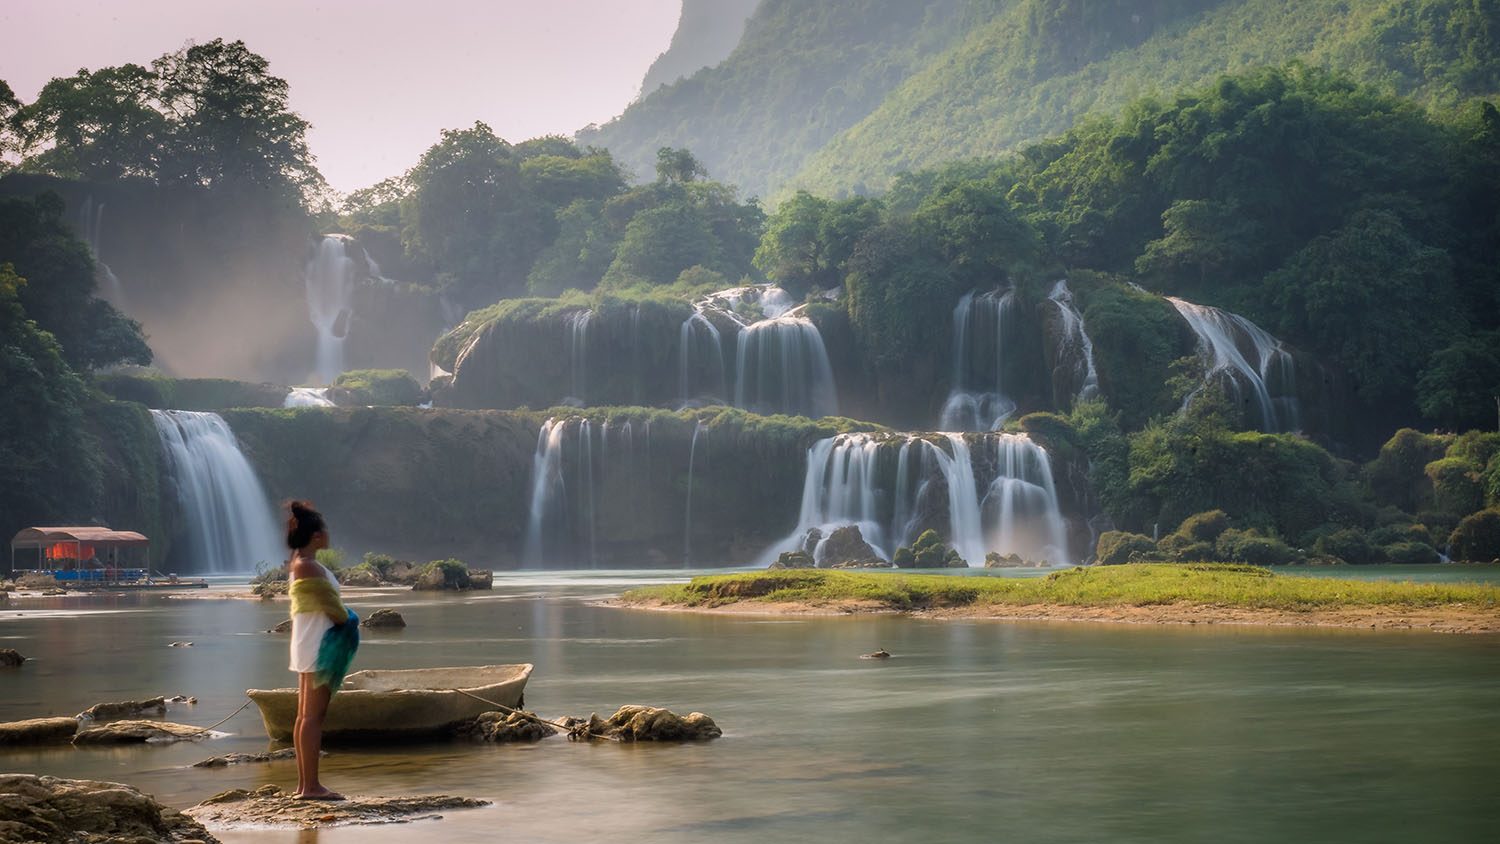 BAN GIOC WATERFALL. This body of water separates Vietnam from China. Photo by Tobias Nussbaumer/Rappler 